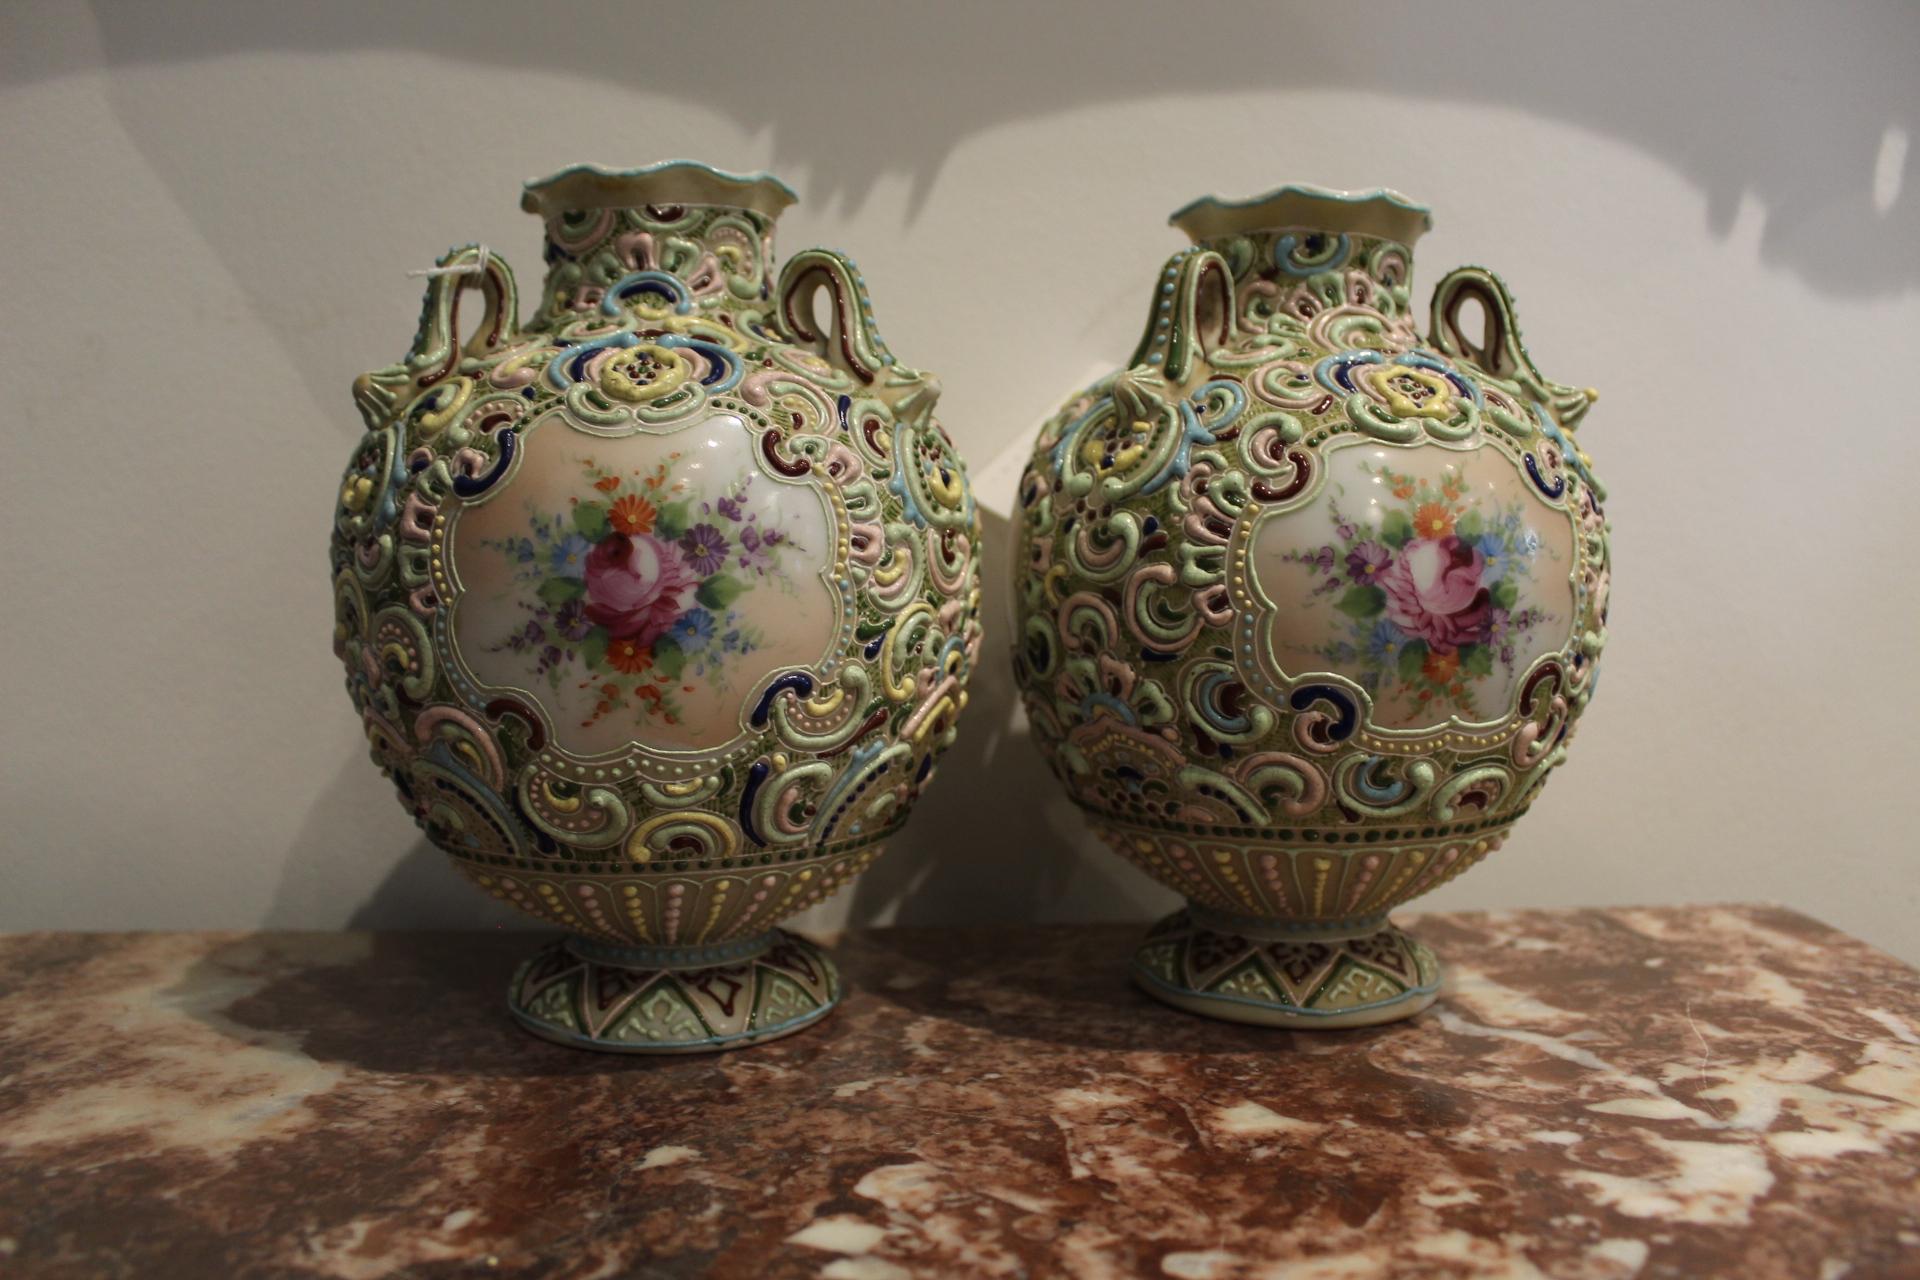 The pair feature a round foot upon which a globular body sits with a short gently ruffled neck, surrounded by three small decorative handles. Having a matte body, they are decorated in a thick colorful decoration using diluted clay or slip, called